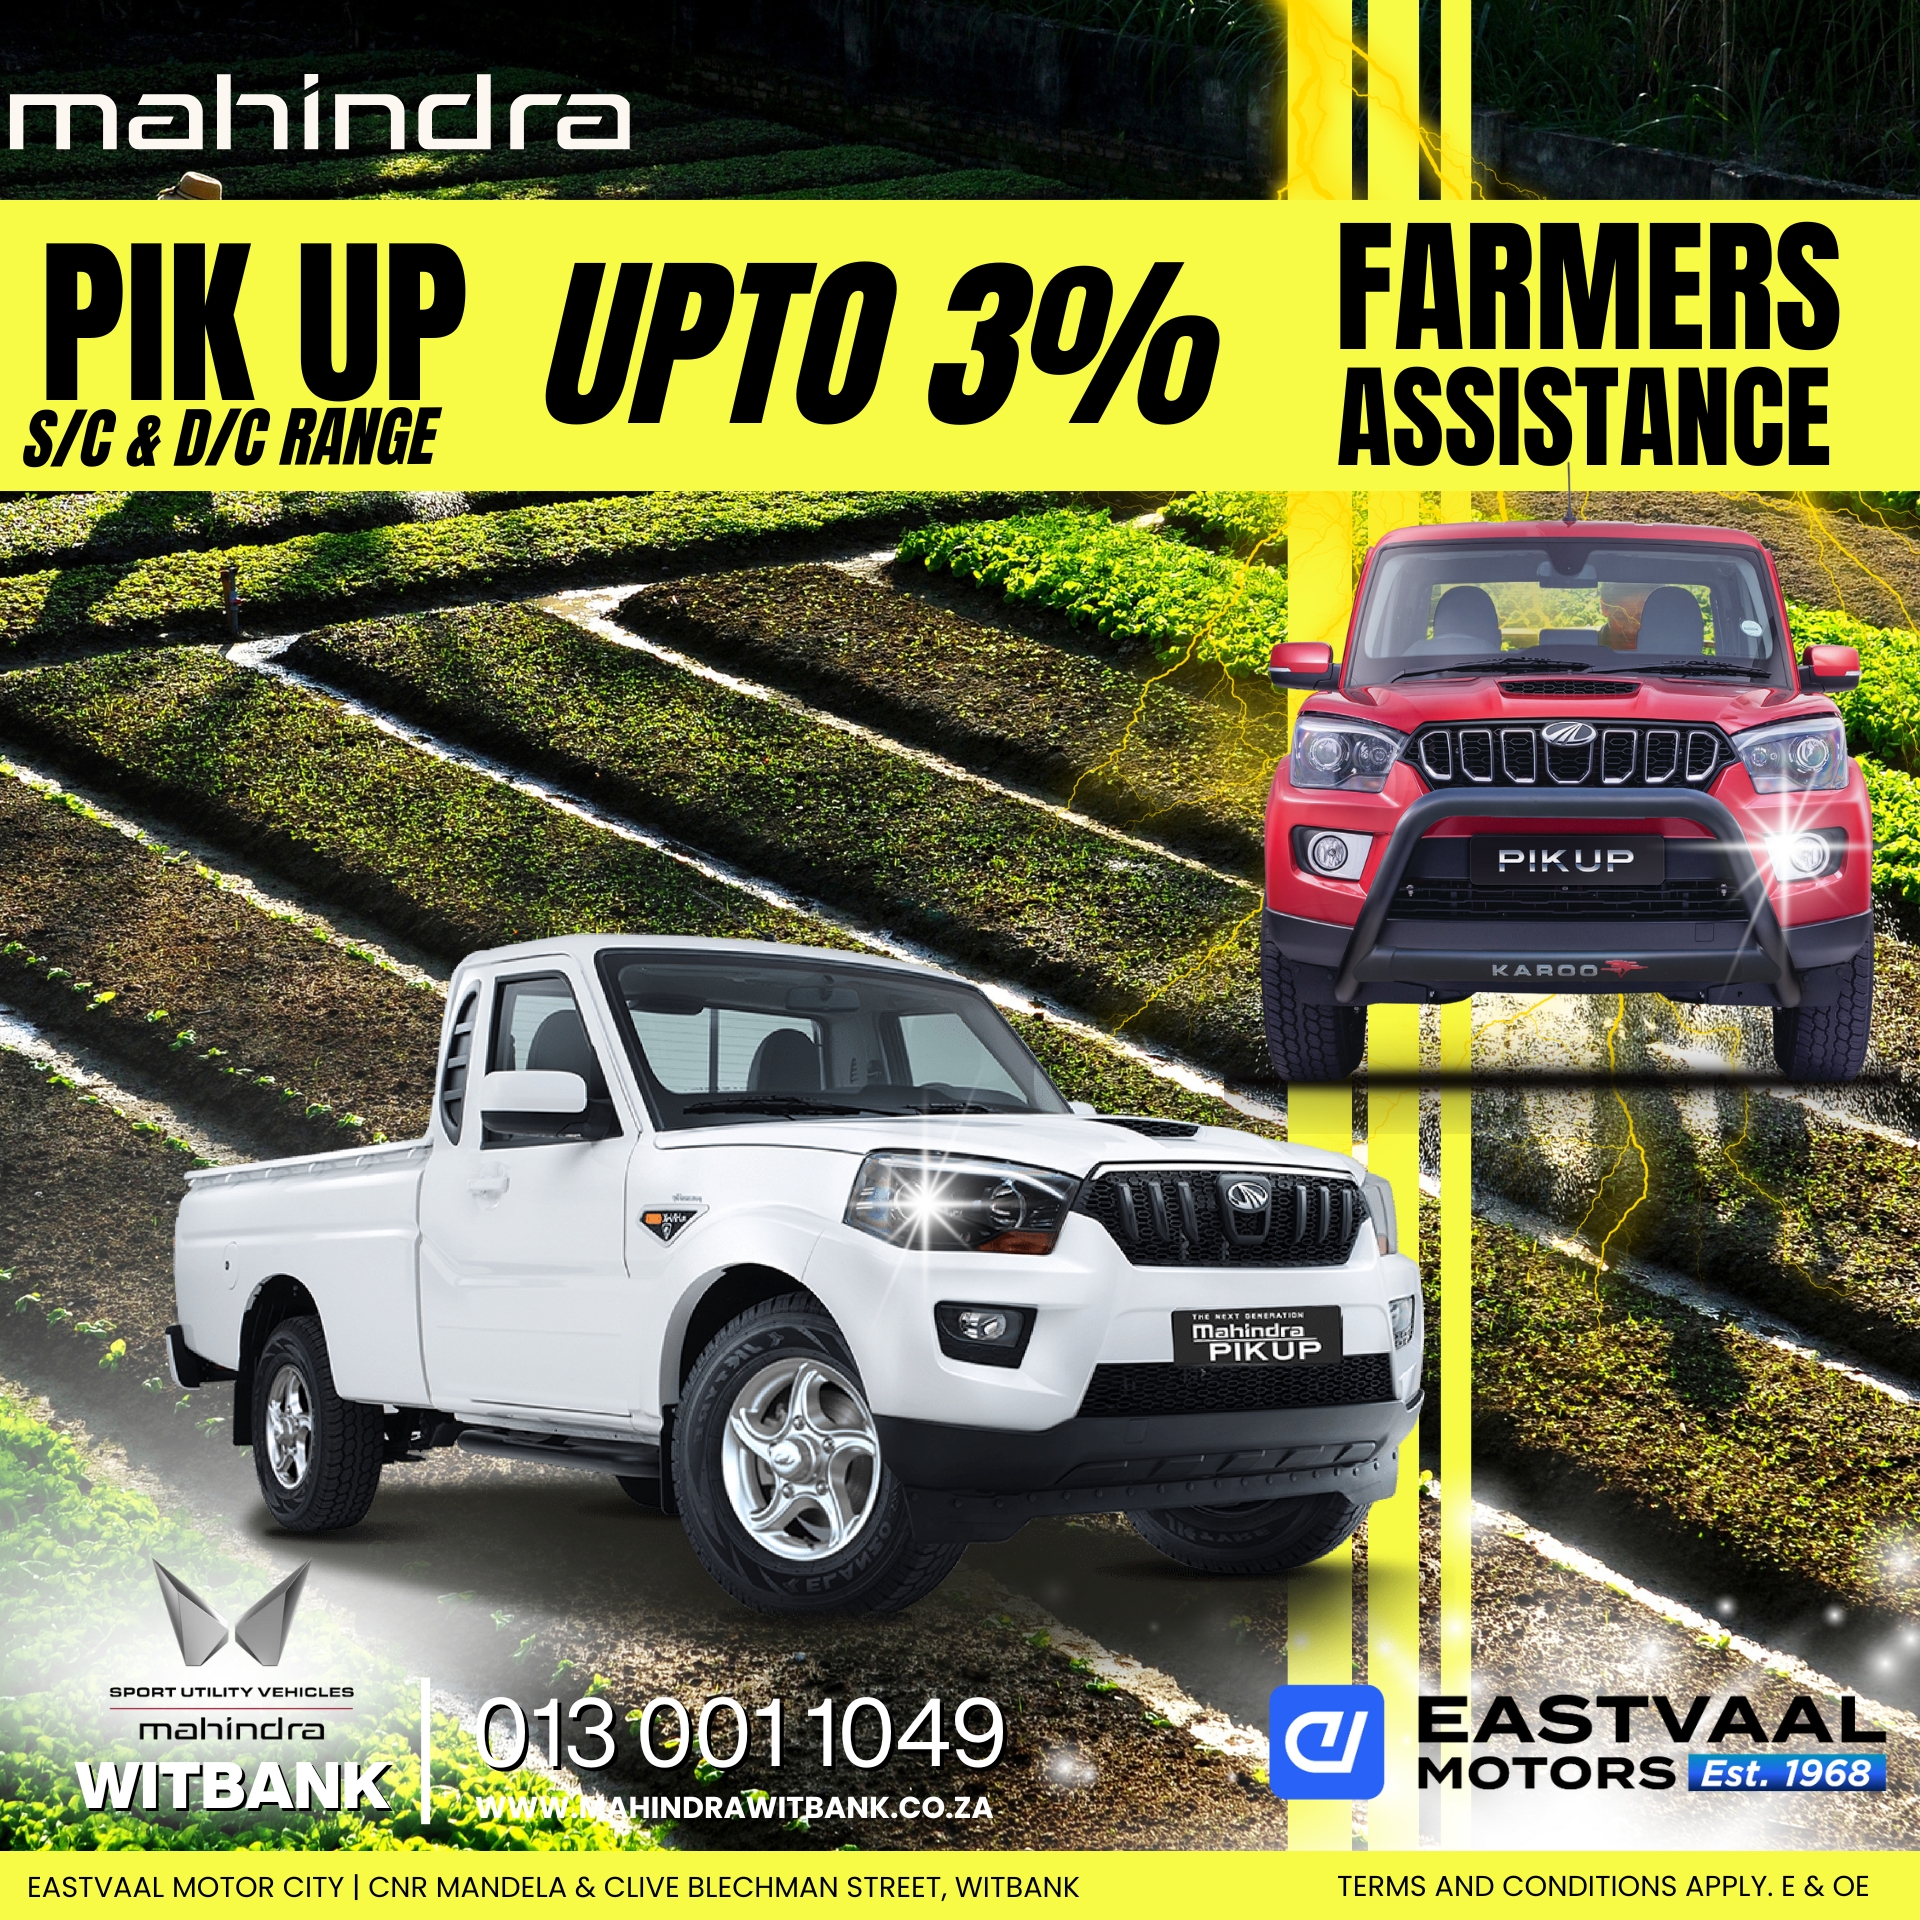 Get ready for the adventure of a lifetime with Mahindra. July deals now on at Eastvaal Motor City! image from 